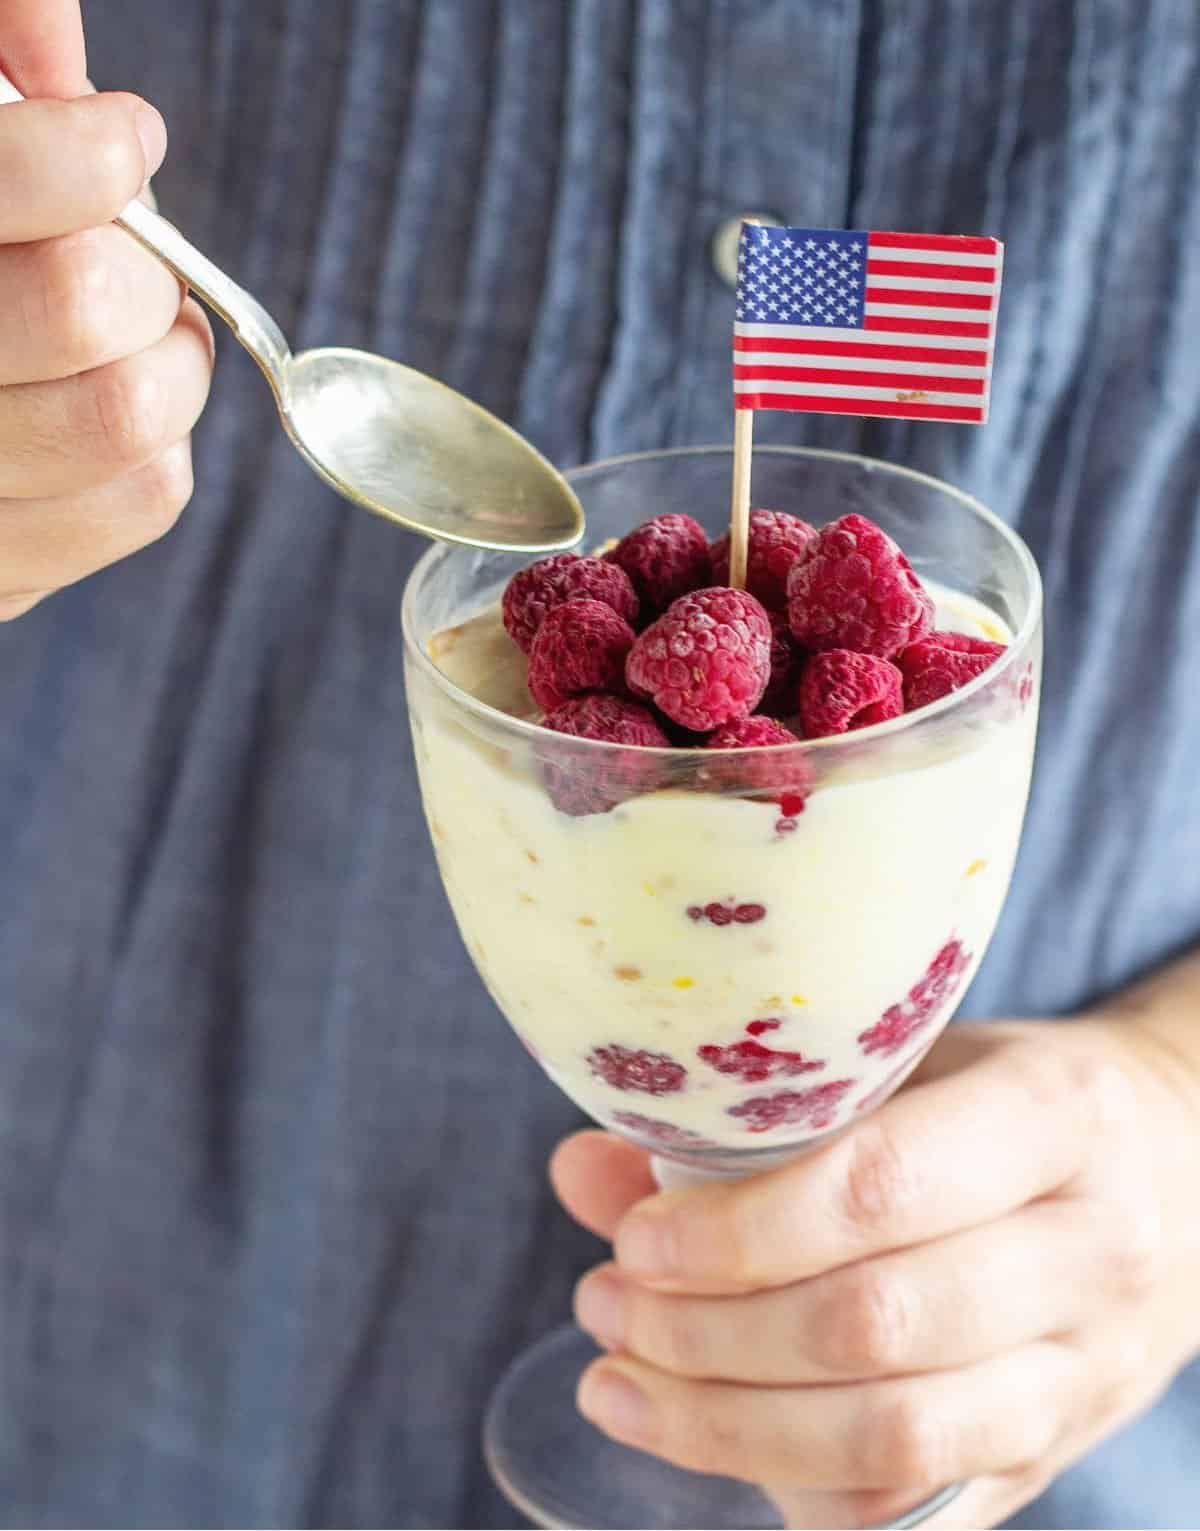 Blue background with hands holding spoon and glass with lemon raspberry dessert, american flag on top.